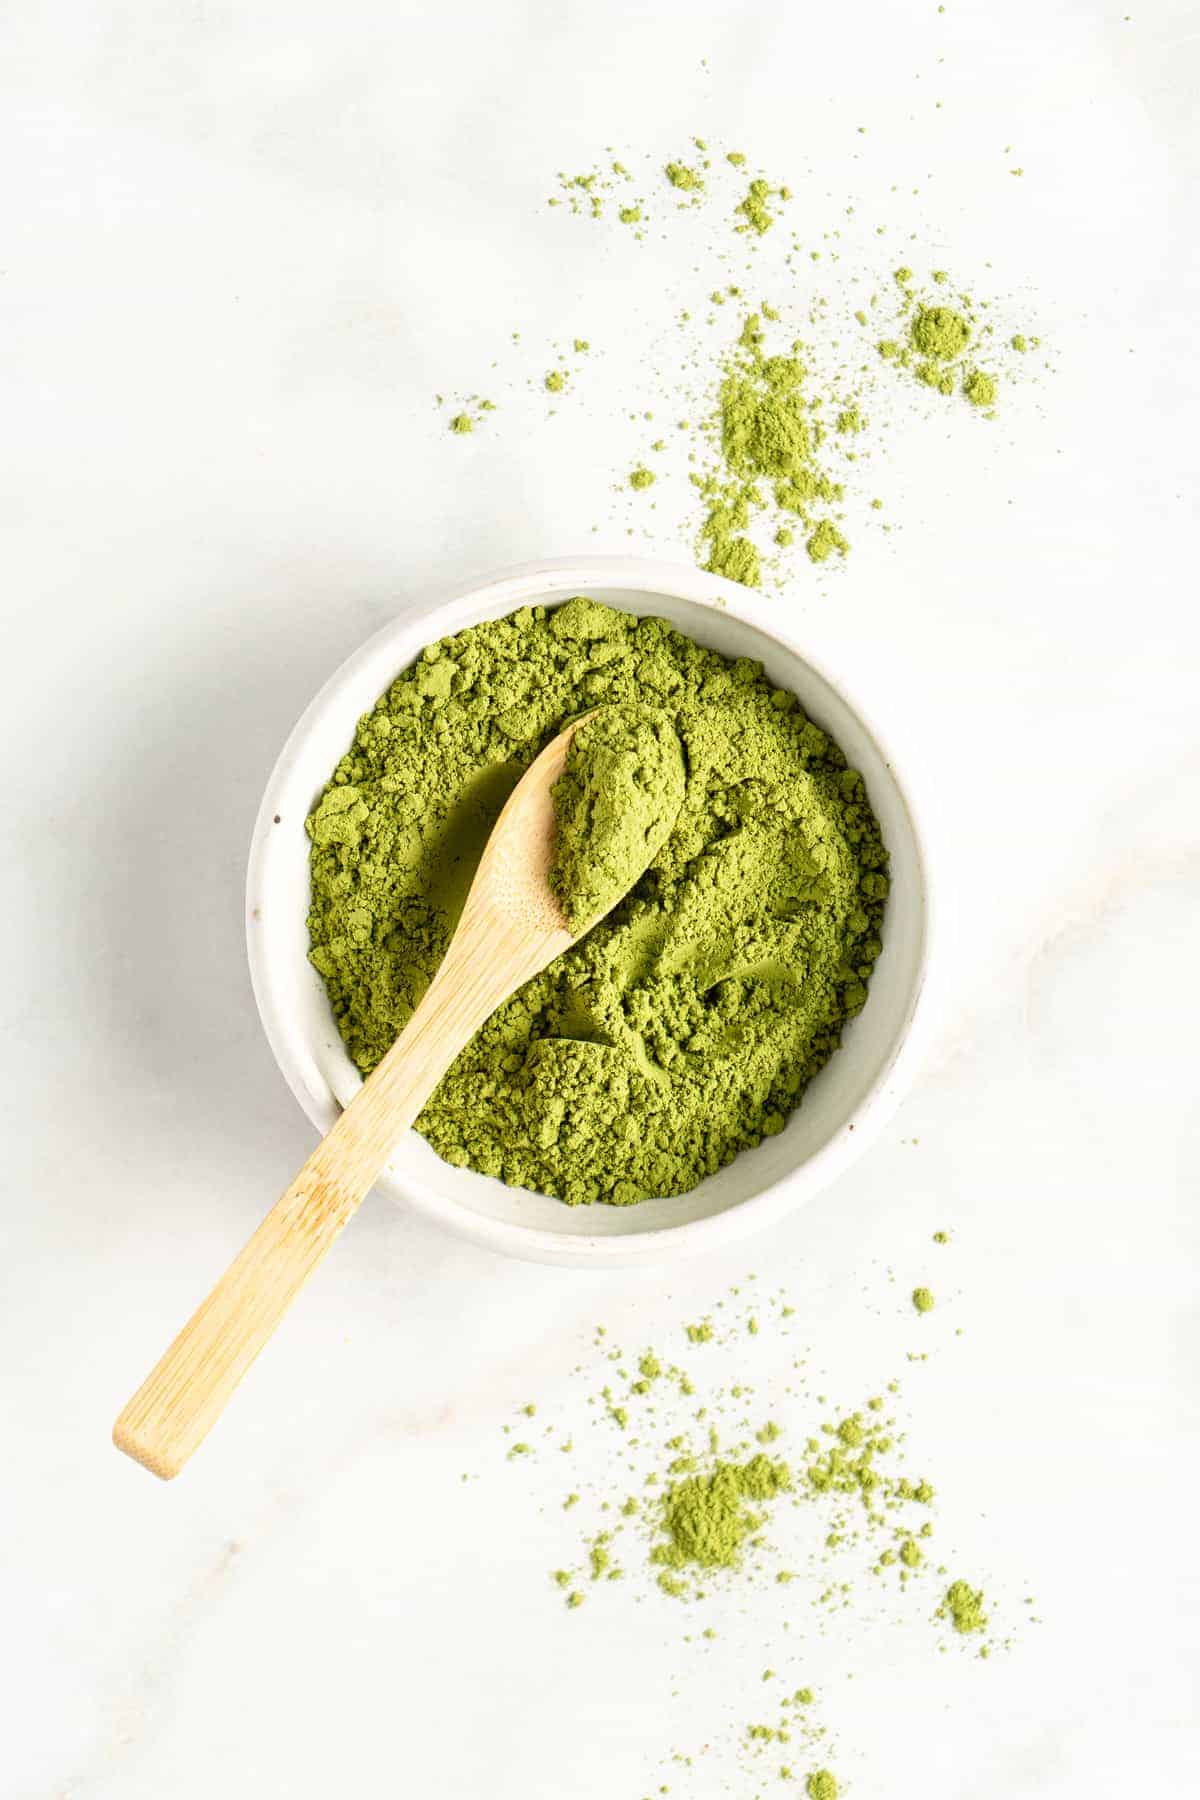 Small bowl of matcha powder with small wooden spoon